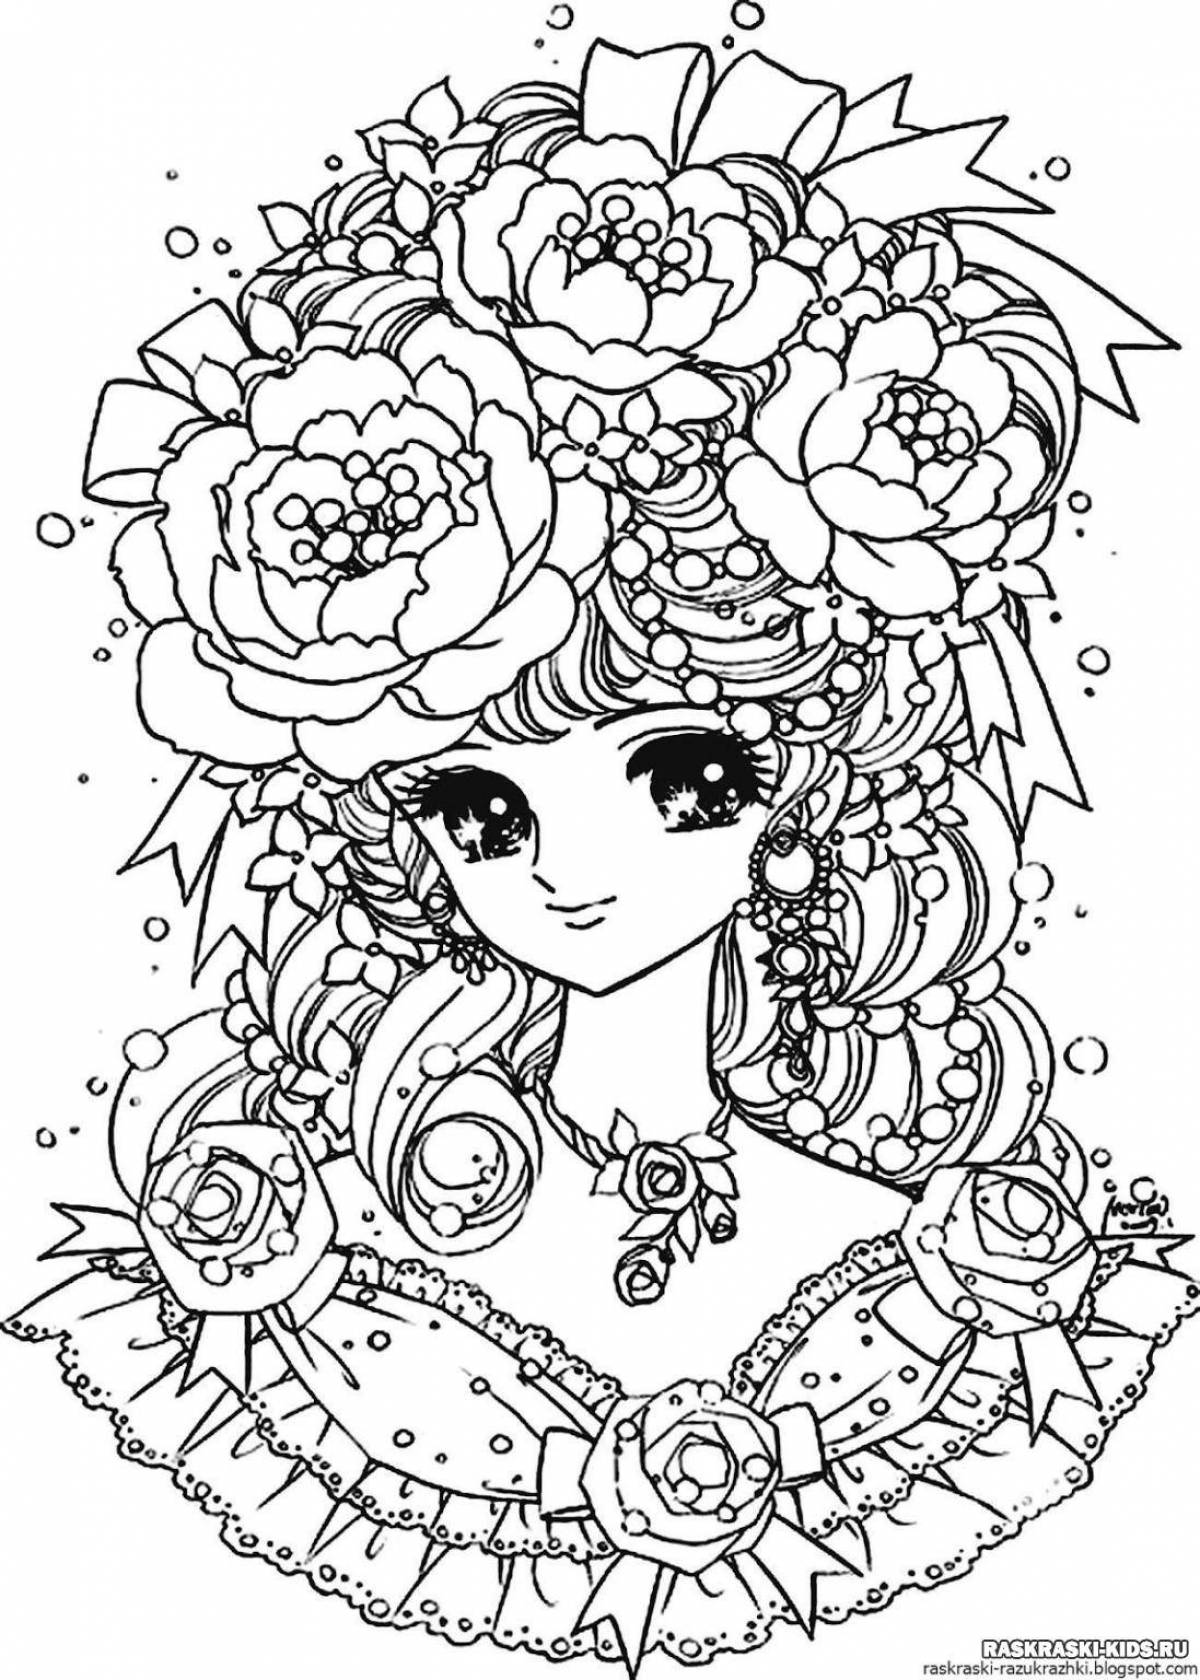 A wonderful coloring book for girls 9-8 years old